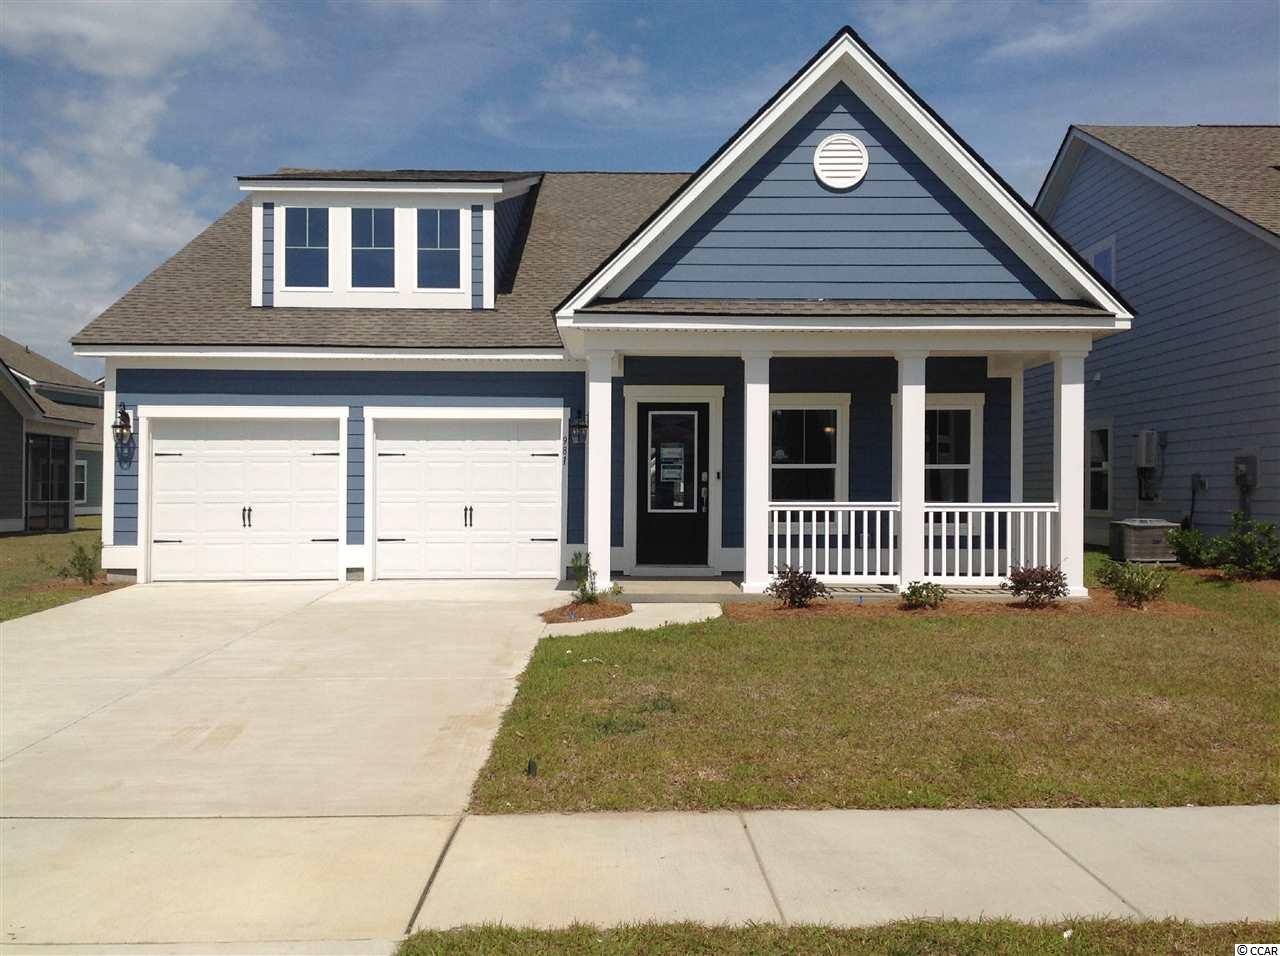 981 Mourning Dove Dr. Myrtle Beach, SC 29577